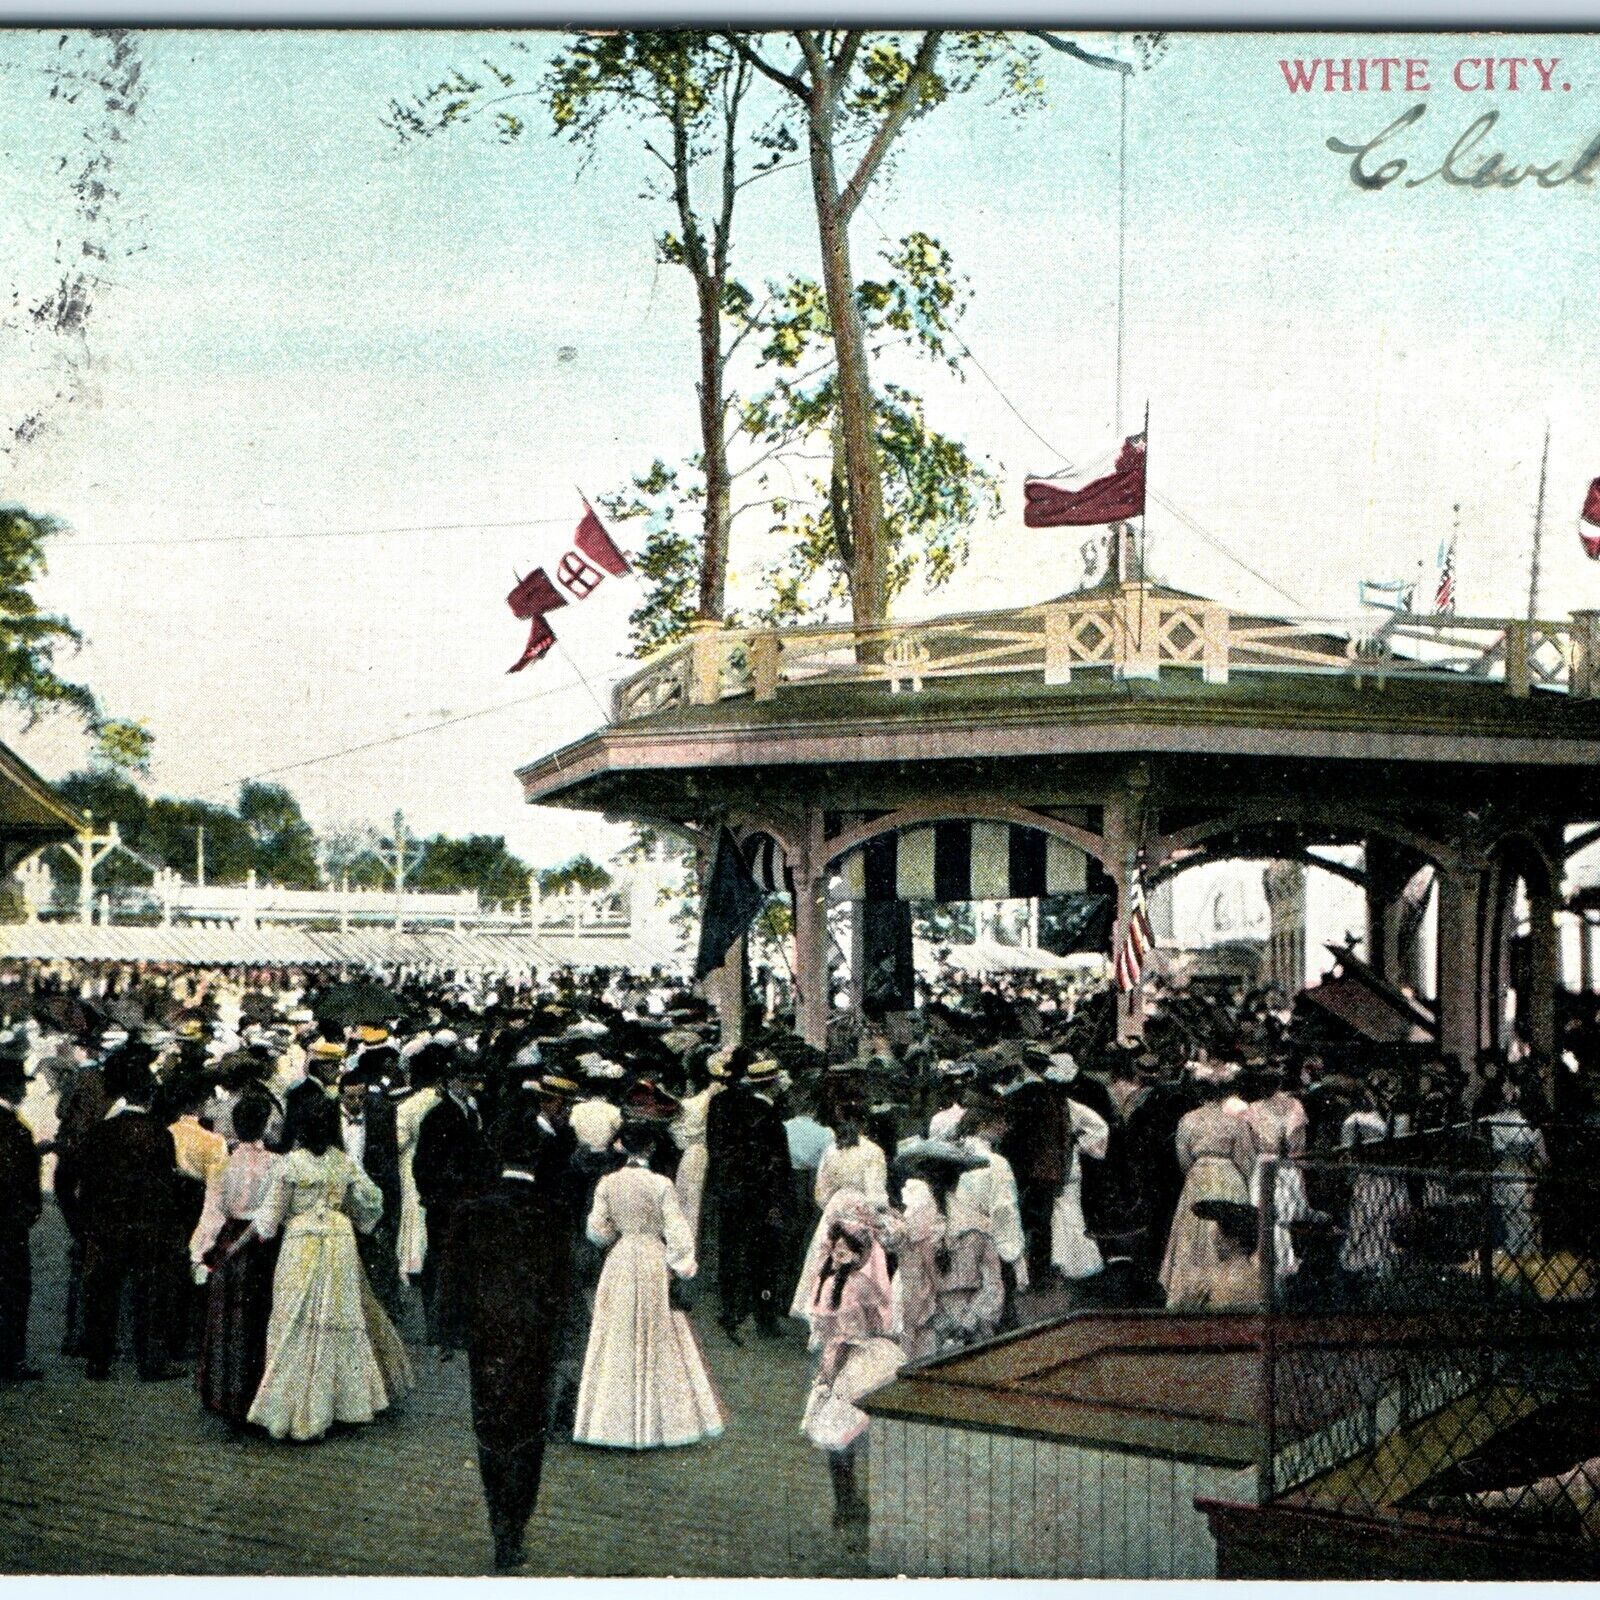 c1900s Cleveland, OH White City Festival Circus Market Postcard Crowd Photo A66